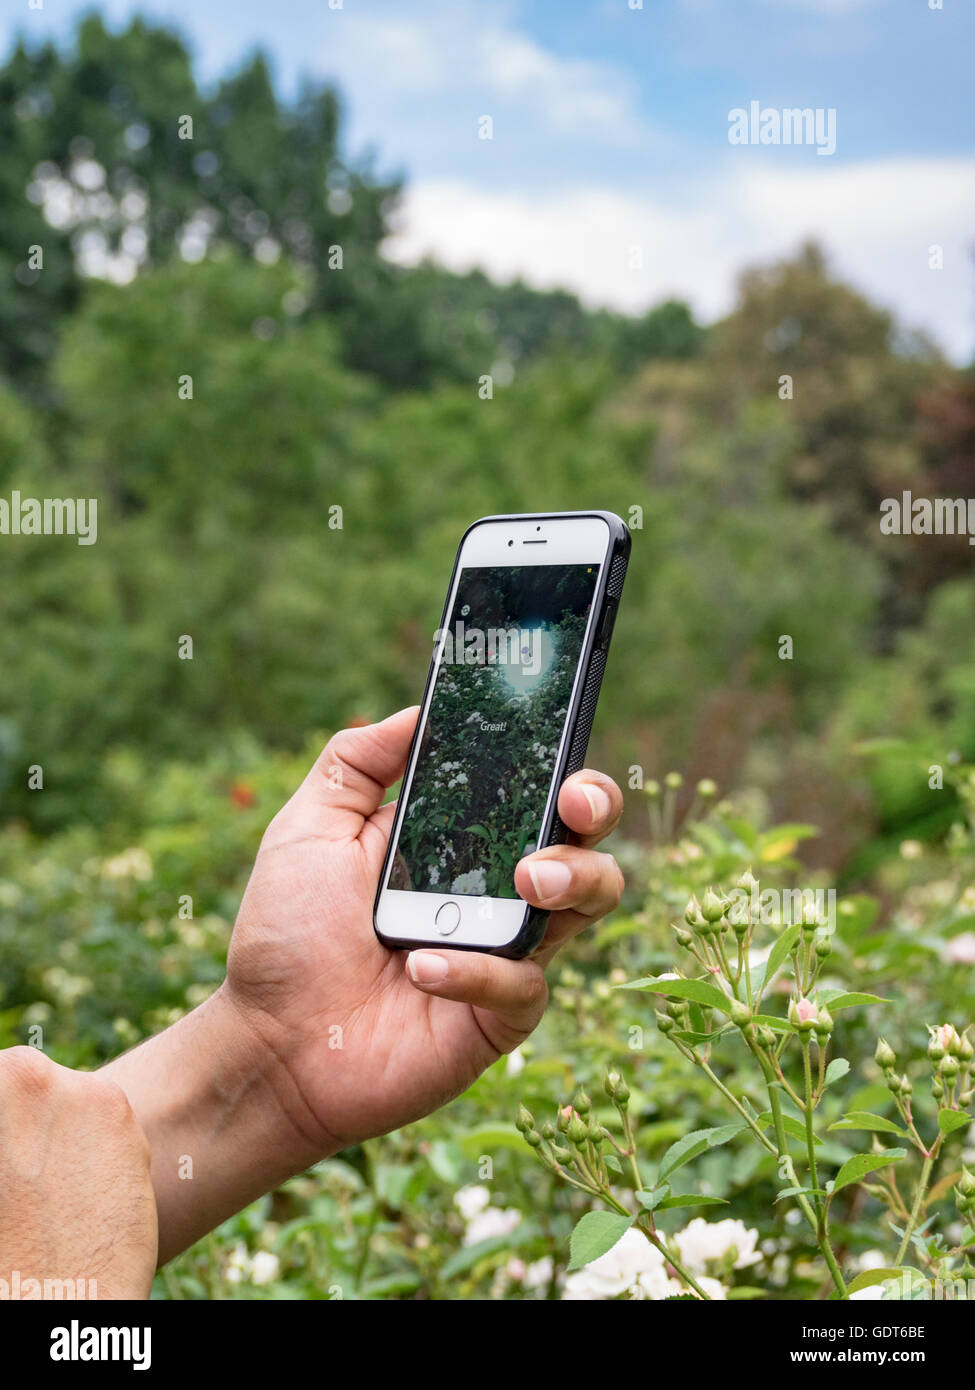 Columbus, Ohio, USA, 21 July 2016: Close up of hands  playing Pokemon Go on mobile phone screen at the Park of Roses. Pokemon Go is a location based augmented reality mobile game developed by Niantic Labs using the popular Nintendo video game action figures. Credit:  2016 Marianne A. Campolongo/Alamy Live News. Stock Photo